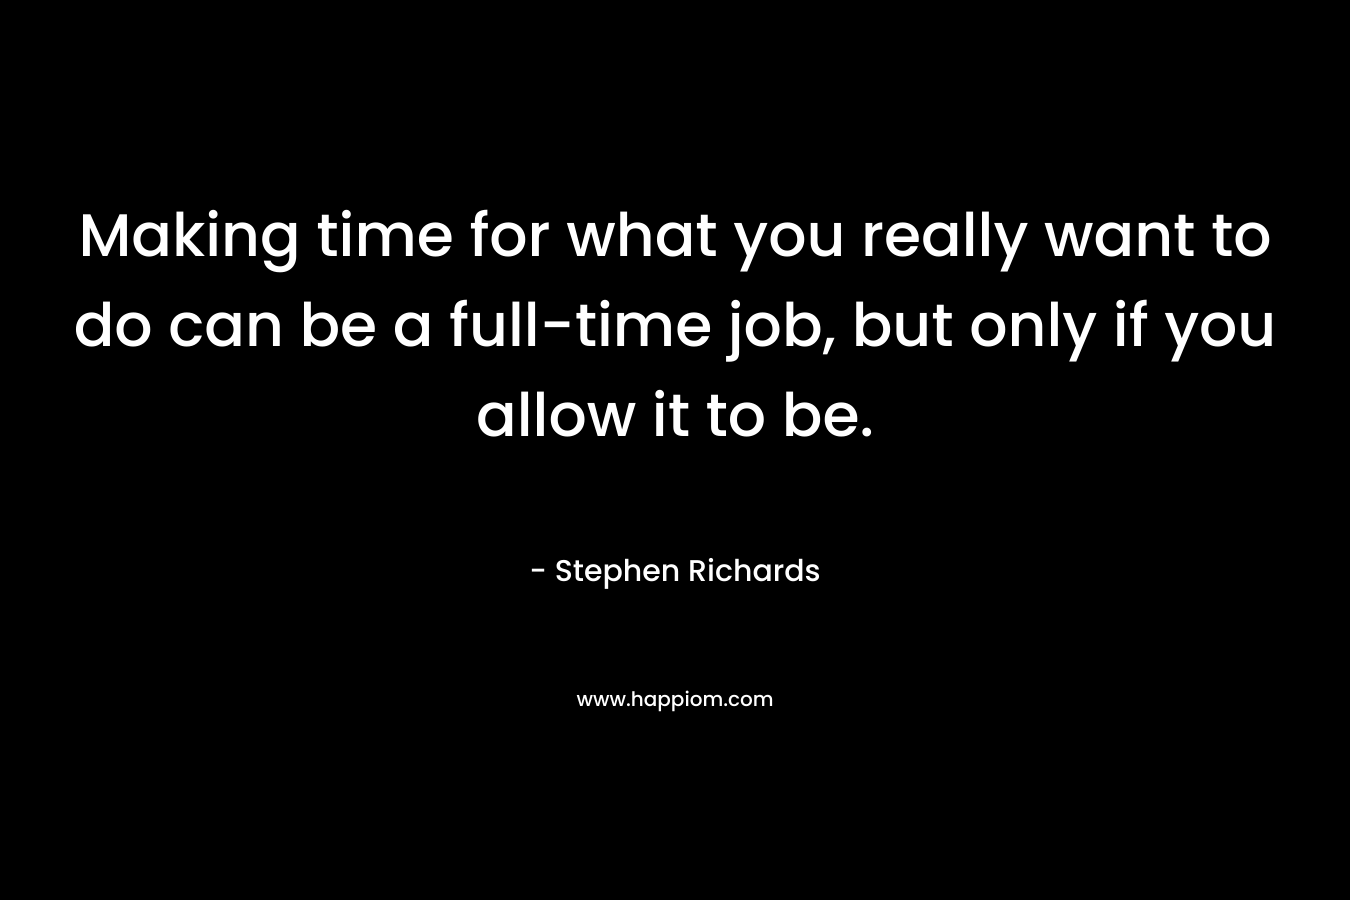 Making time for what you really want to do can be a full-time job, but only if you allow it to be. – Stephen Richards